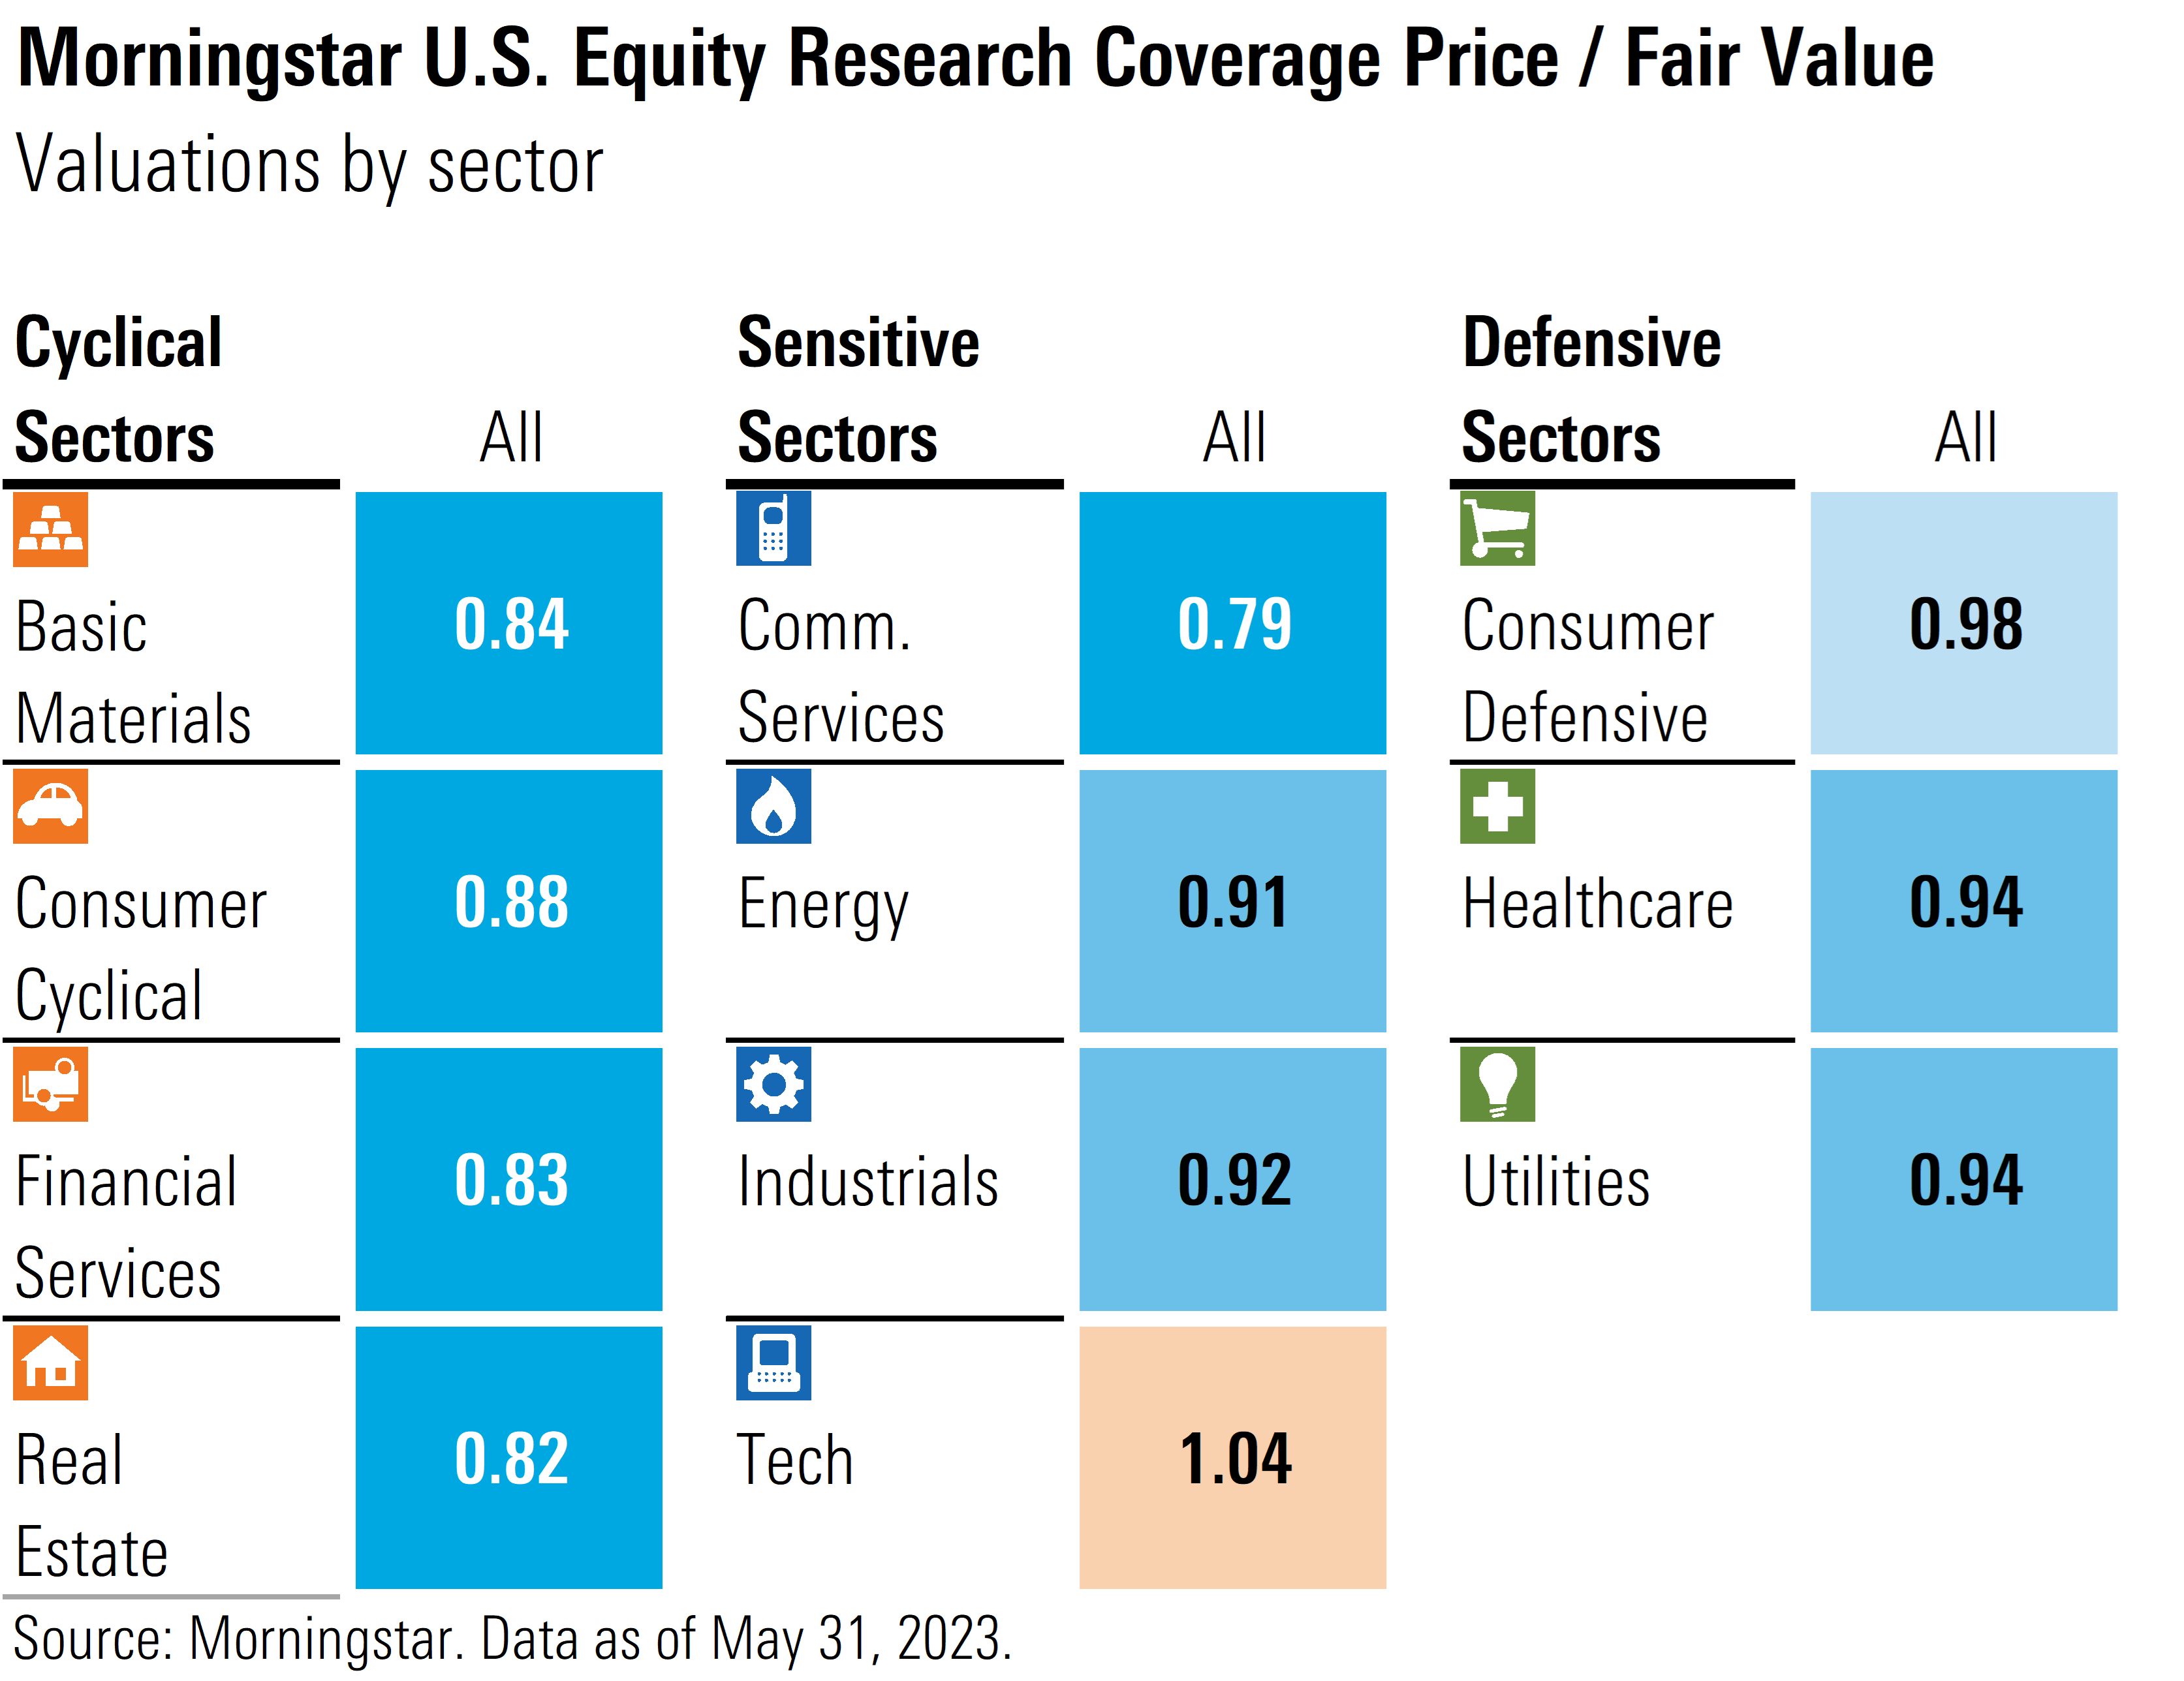 Graphic containing the price to fair value metric by sector.